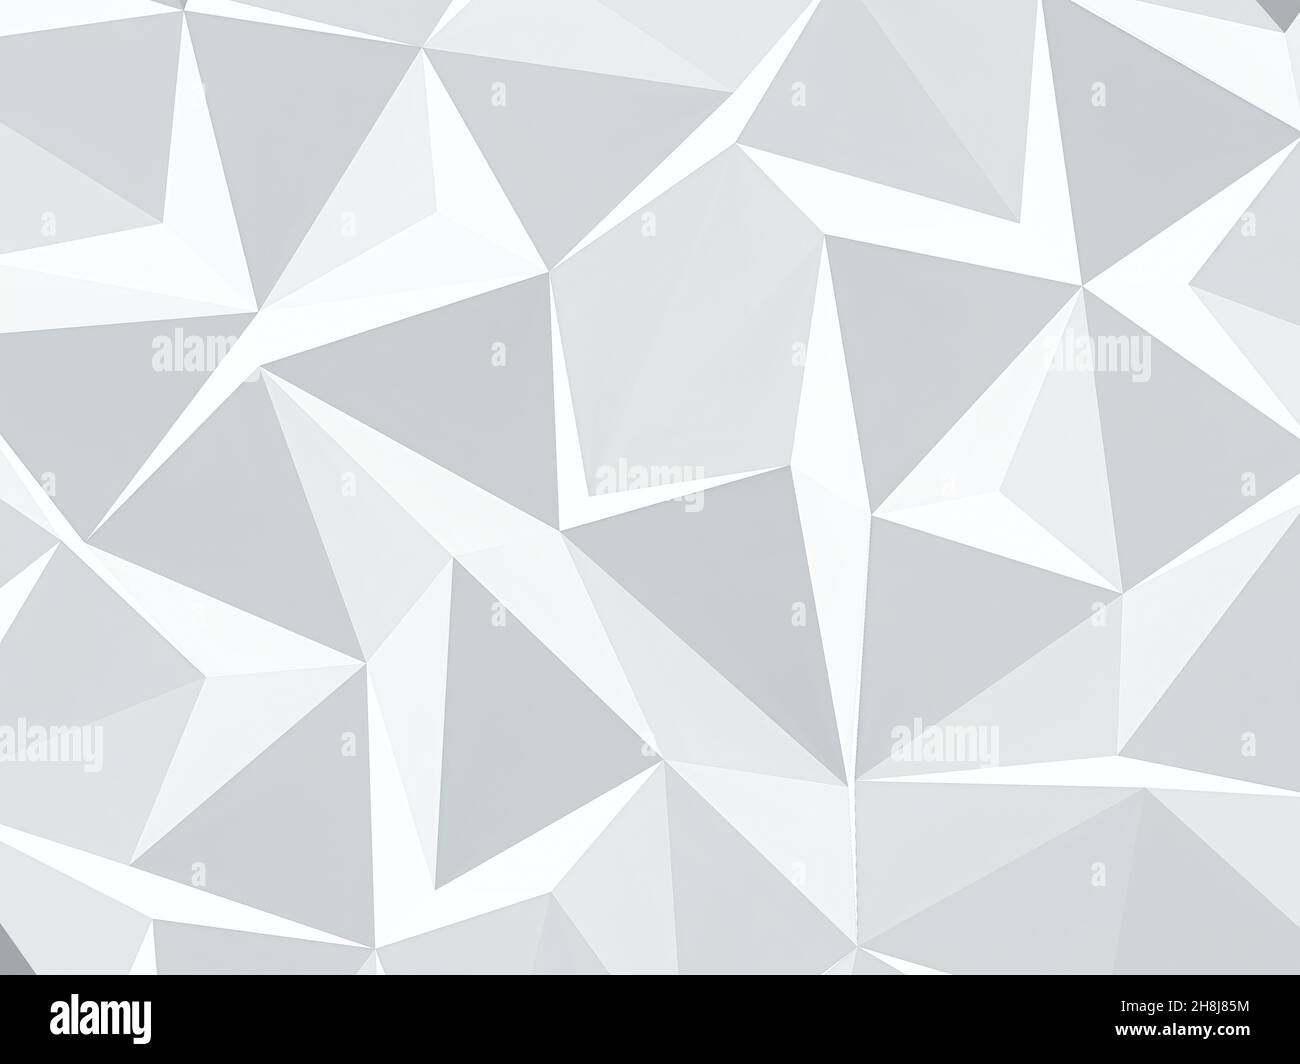 Abstract low poly background geometric shapes - computer generated illustration Stock Photo